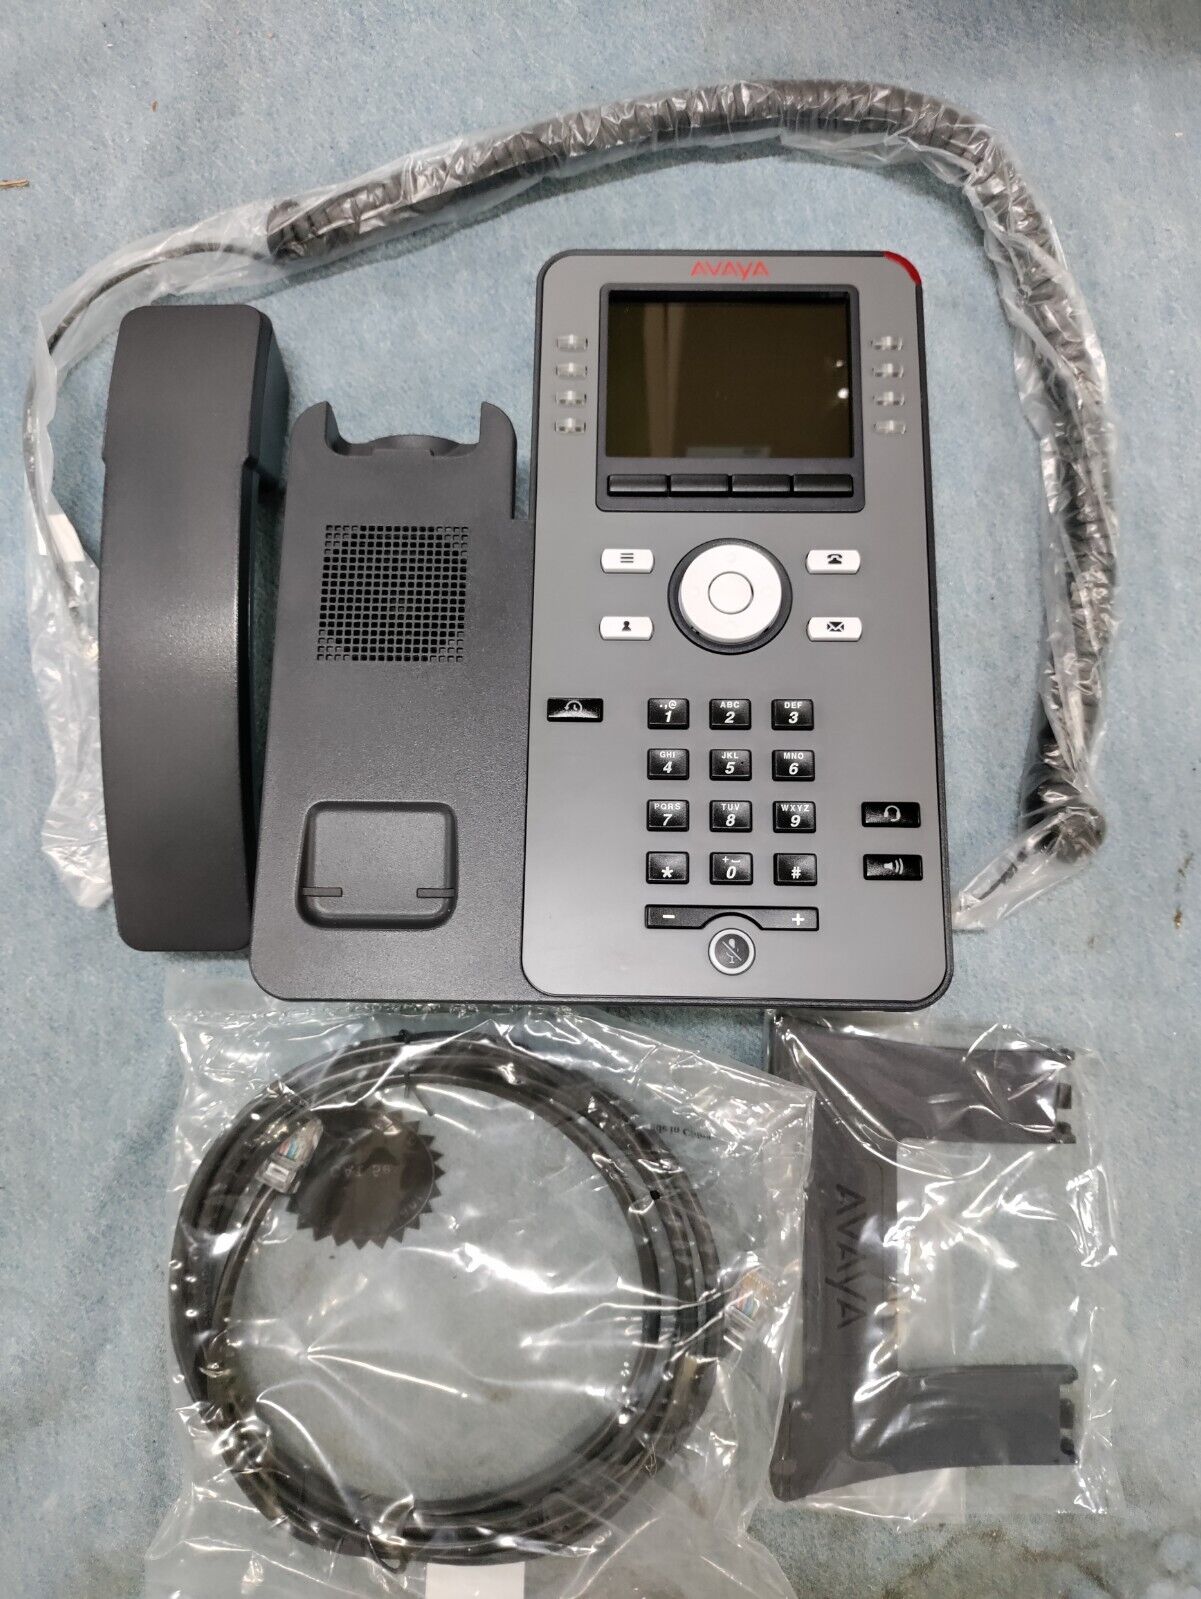 Avaya J179 Gigabit IP Phone Color (700513569) new buttons, defaulted, A stock